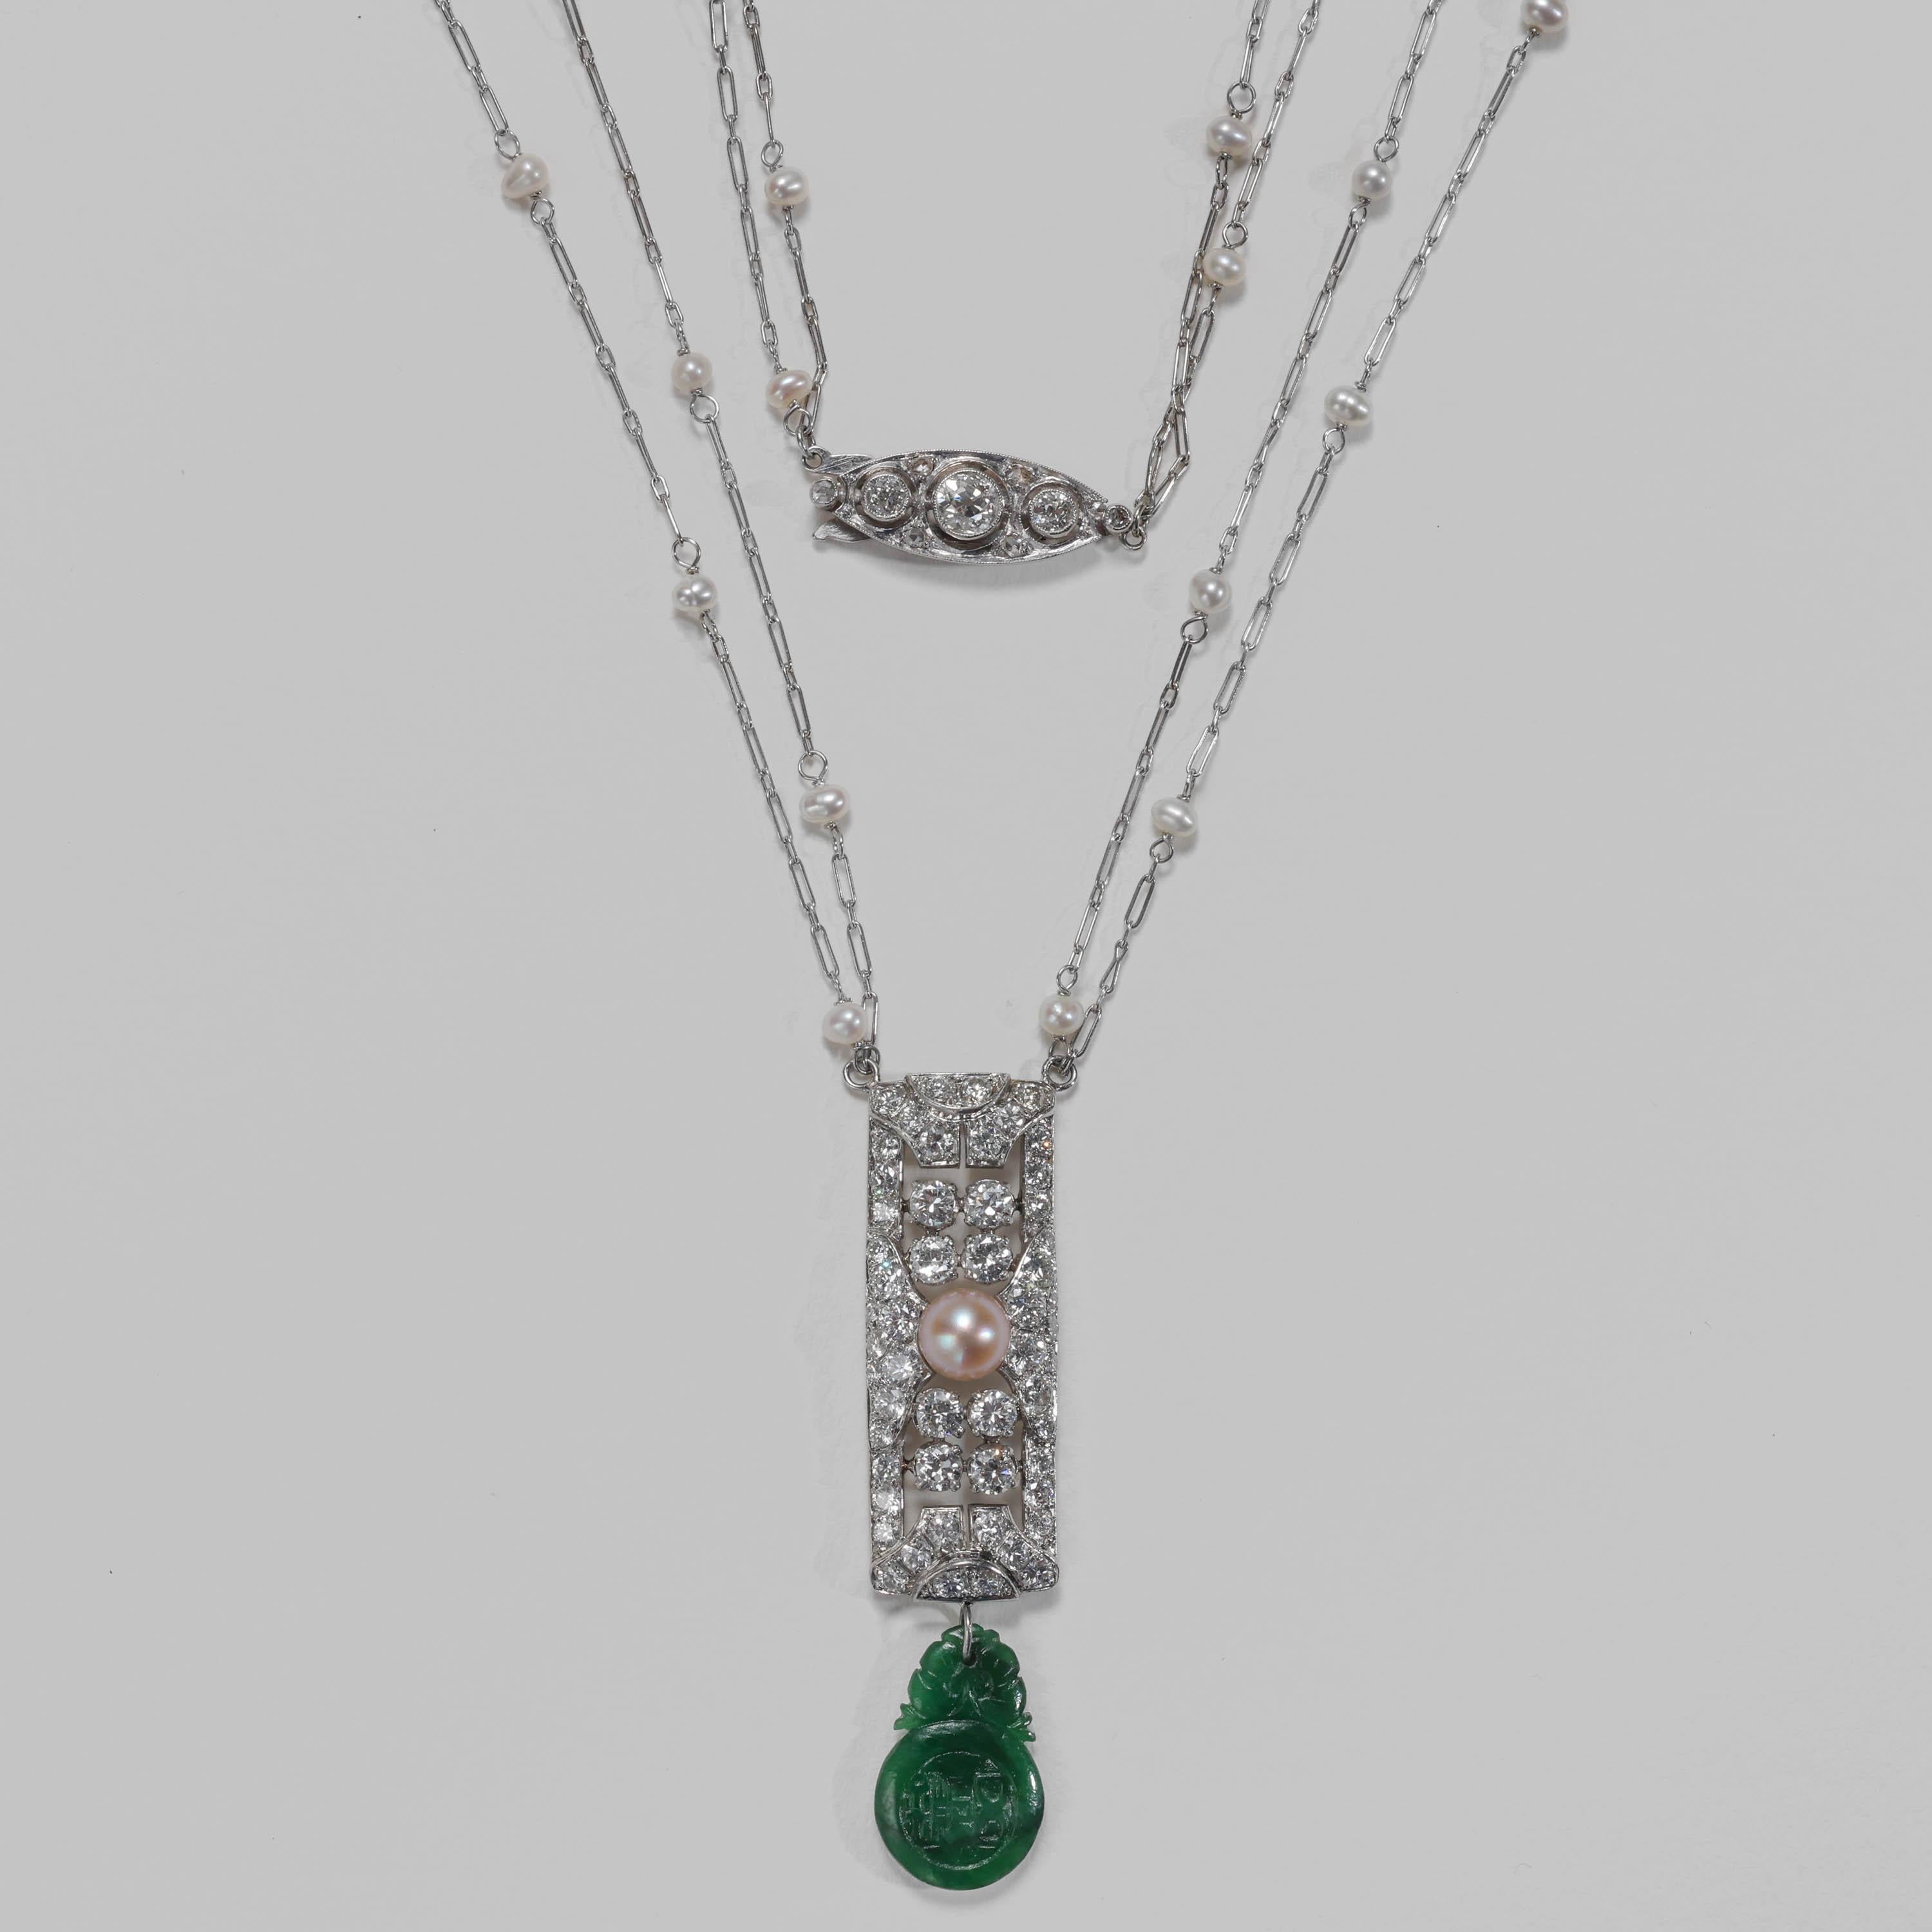 This Art Deco pendant necklace —ablaze in old diamonds— features two of the rarest and most precious gems on earth: natural pearl and natural, untreated jadeite jade. The sleek and permanently stylish platinum Art Deco jewel is composed of two